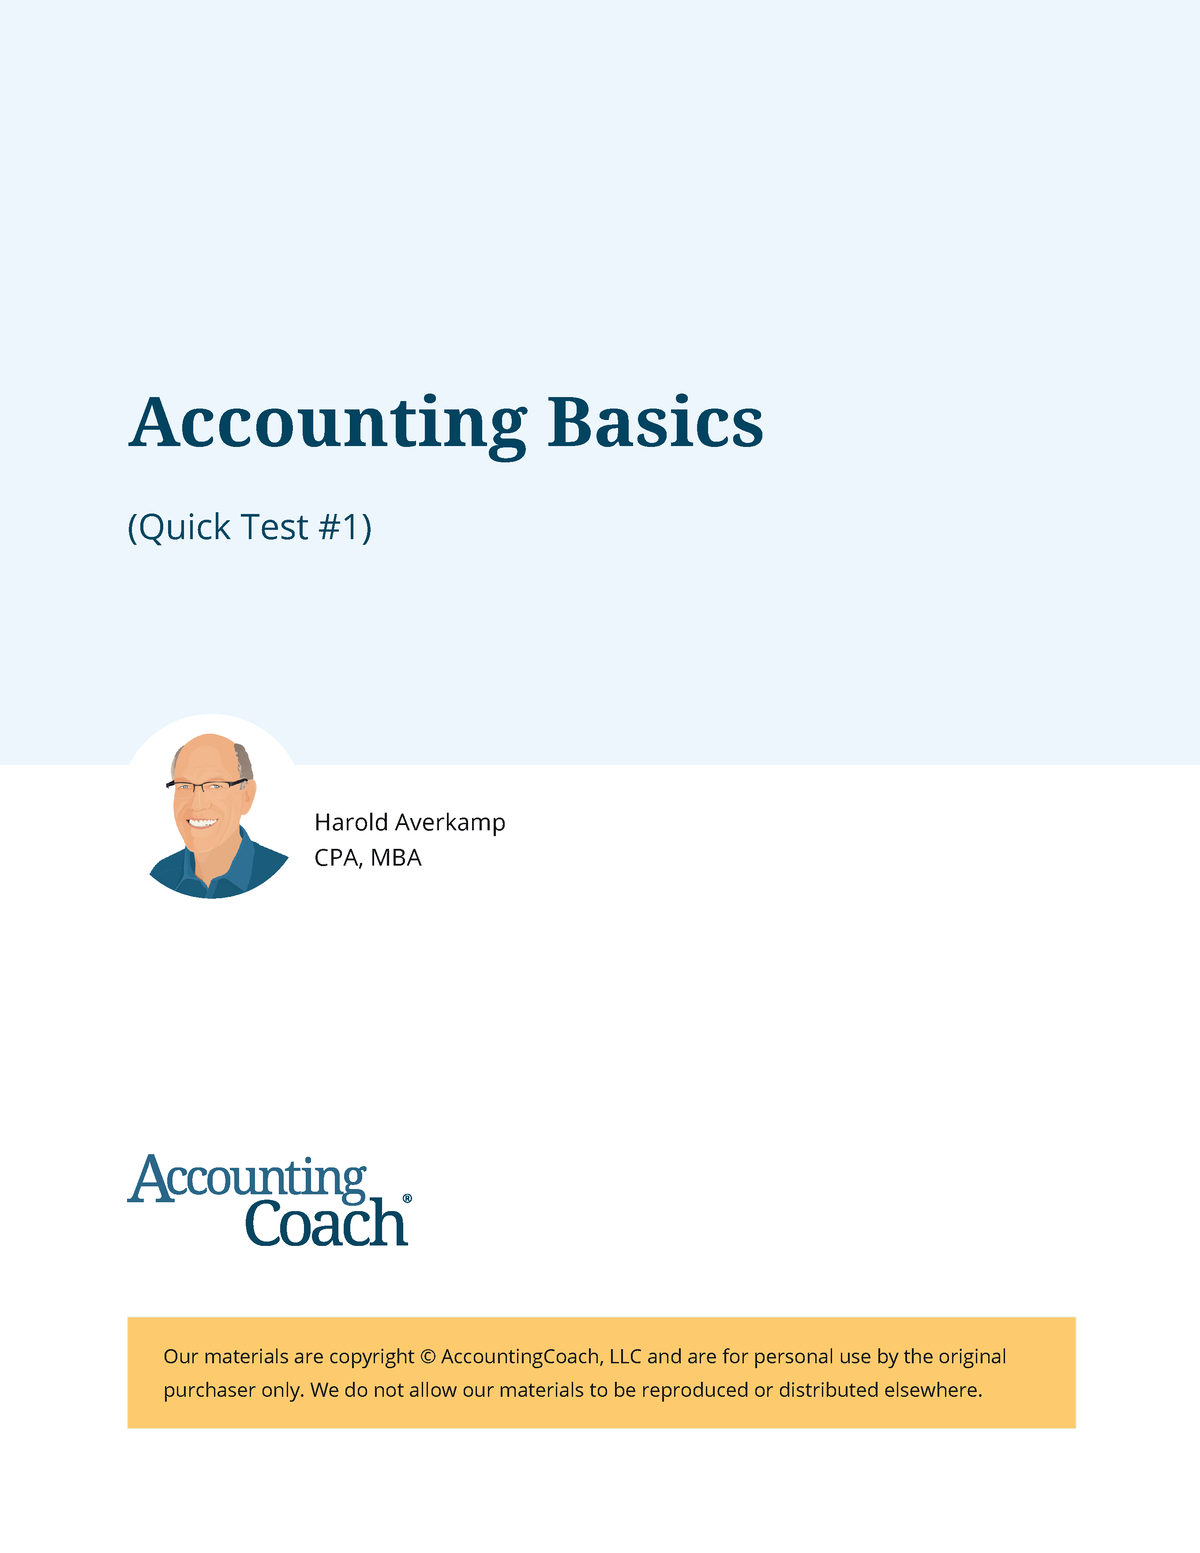 Accounting basics quick test 1 - (Quick Test #1) Our materials are  copyright © AccountingCoach, LLC - Studocu